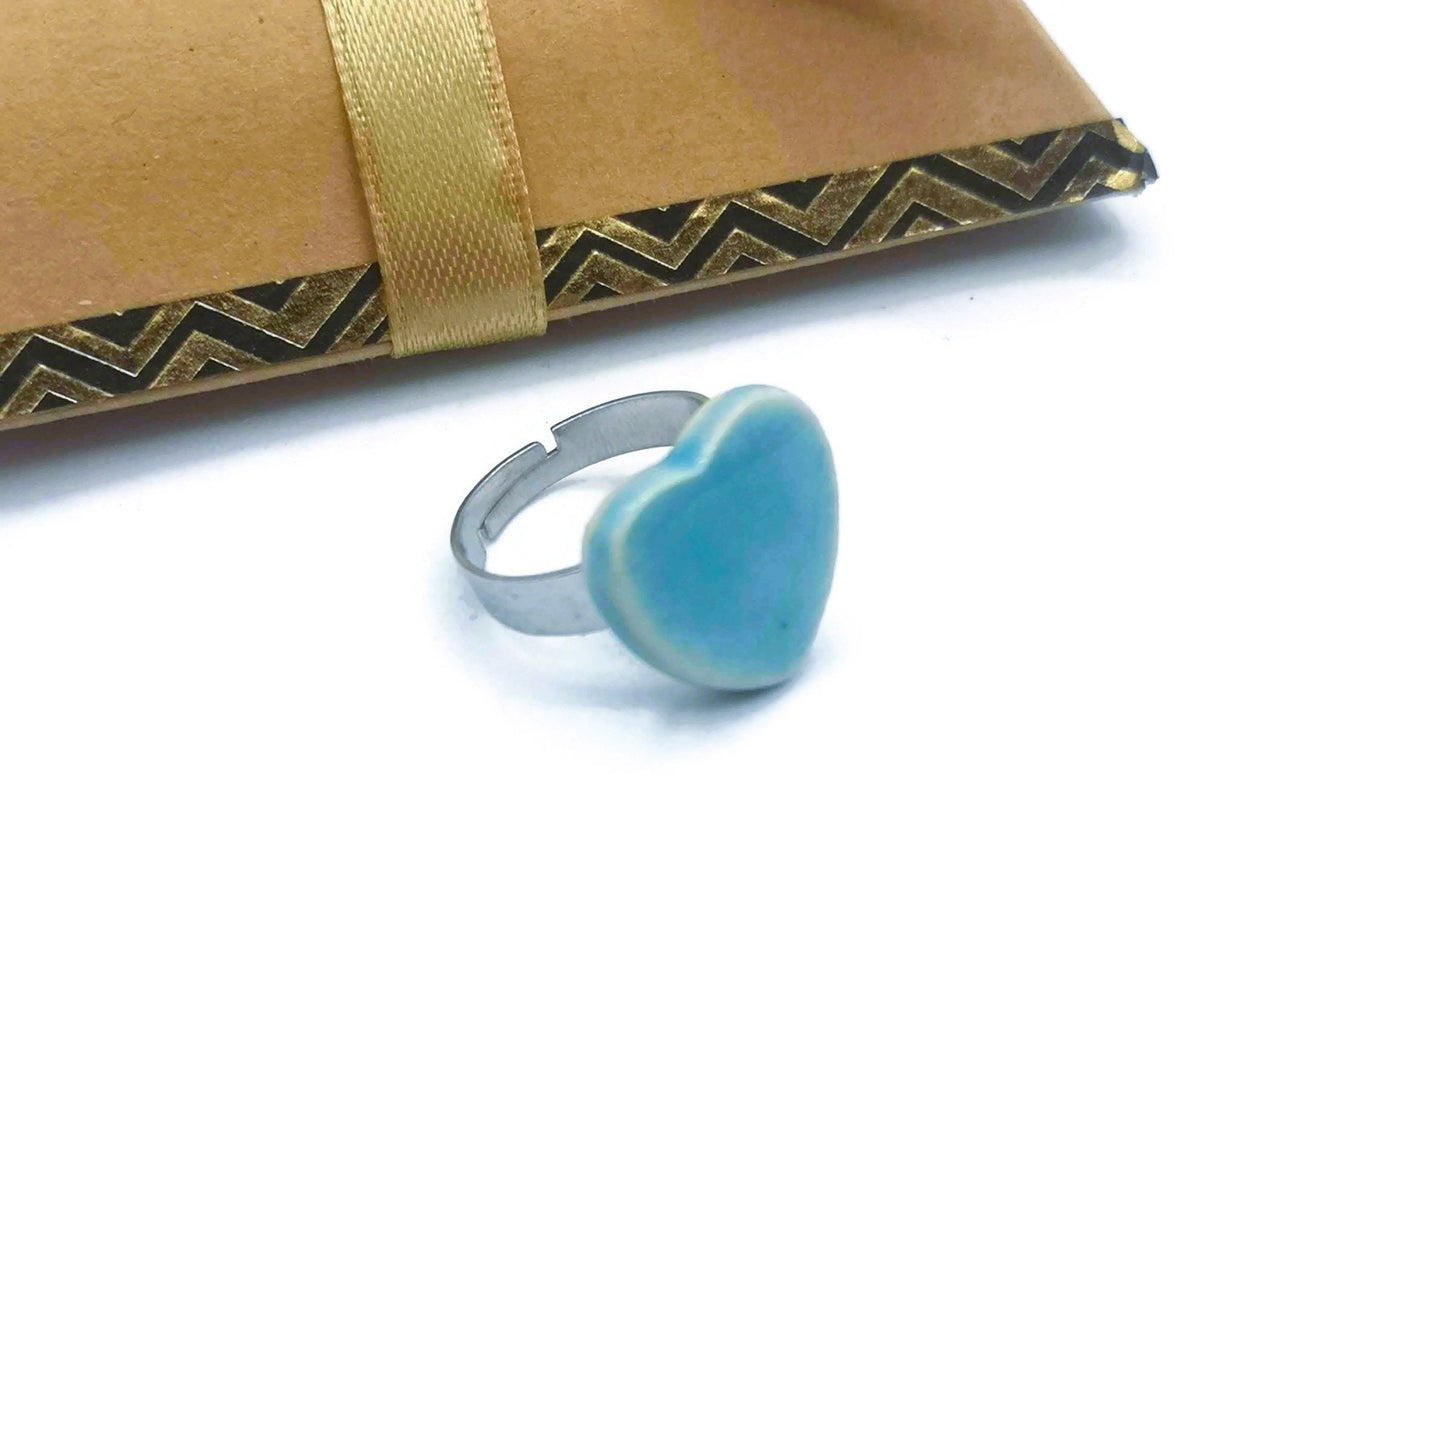 Handmade Ceramic Turquoise Blue Heart Statement Ring For Women, Stainless Steel Adjustable Ring, Porcelain 9th Anniversary Gifts For Her - Ceramica Ana Rafael